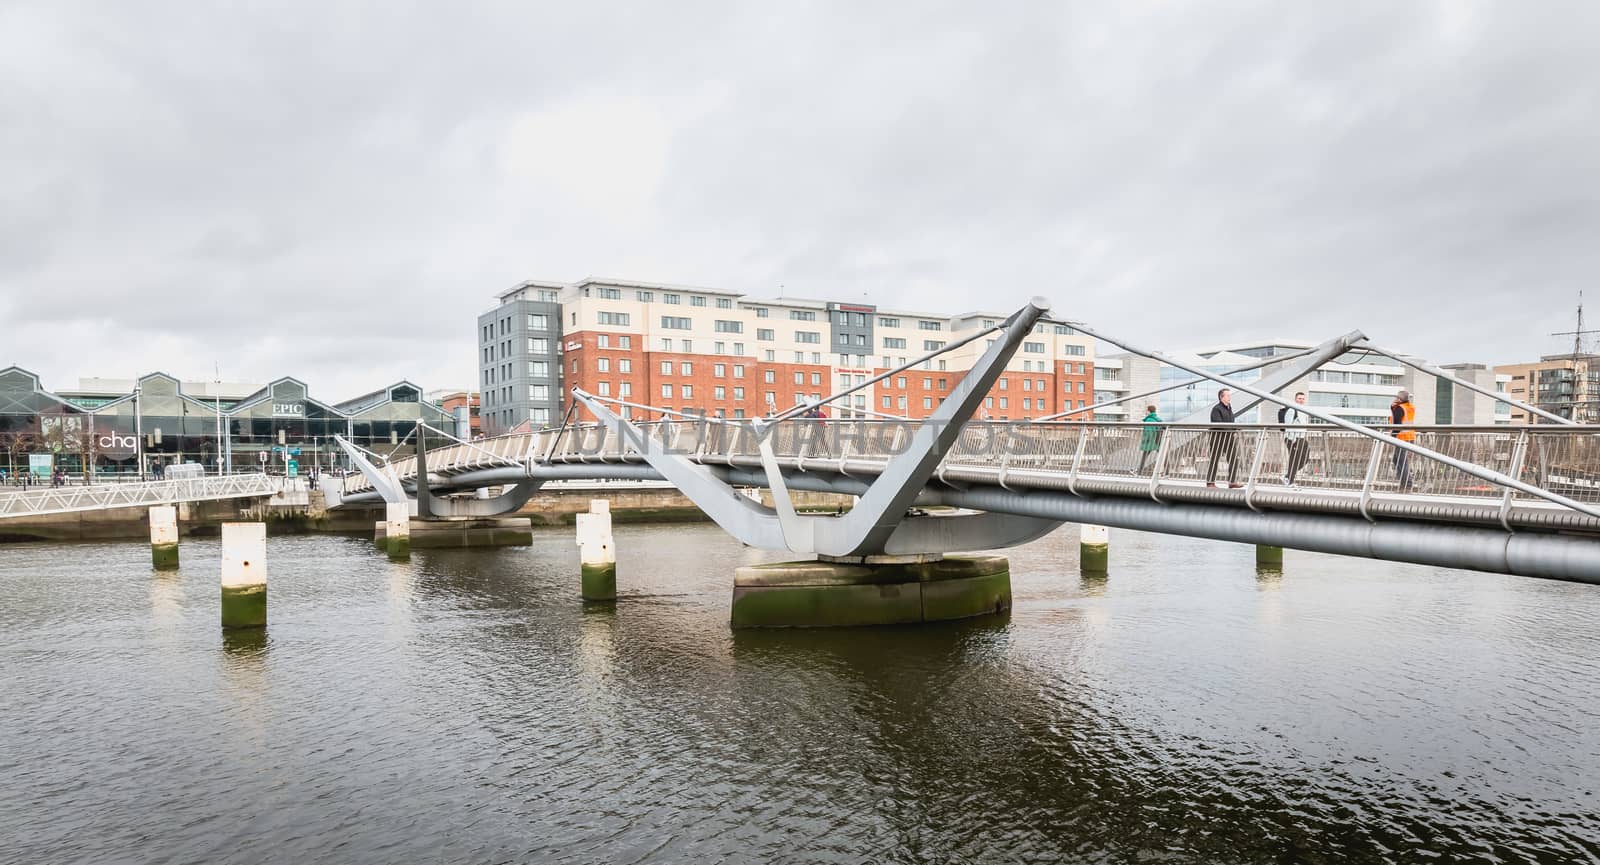  mix of modern and old architecture along the Liffey River in Du by AtlanticEUROSTOXX